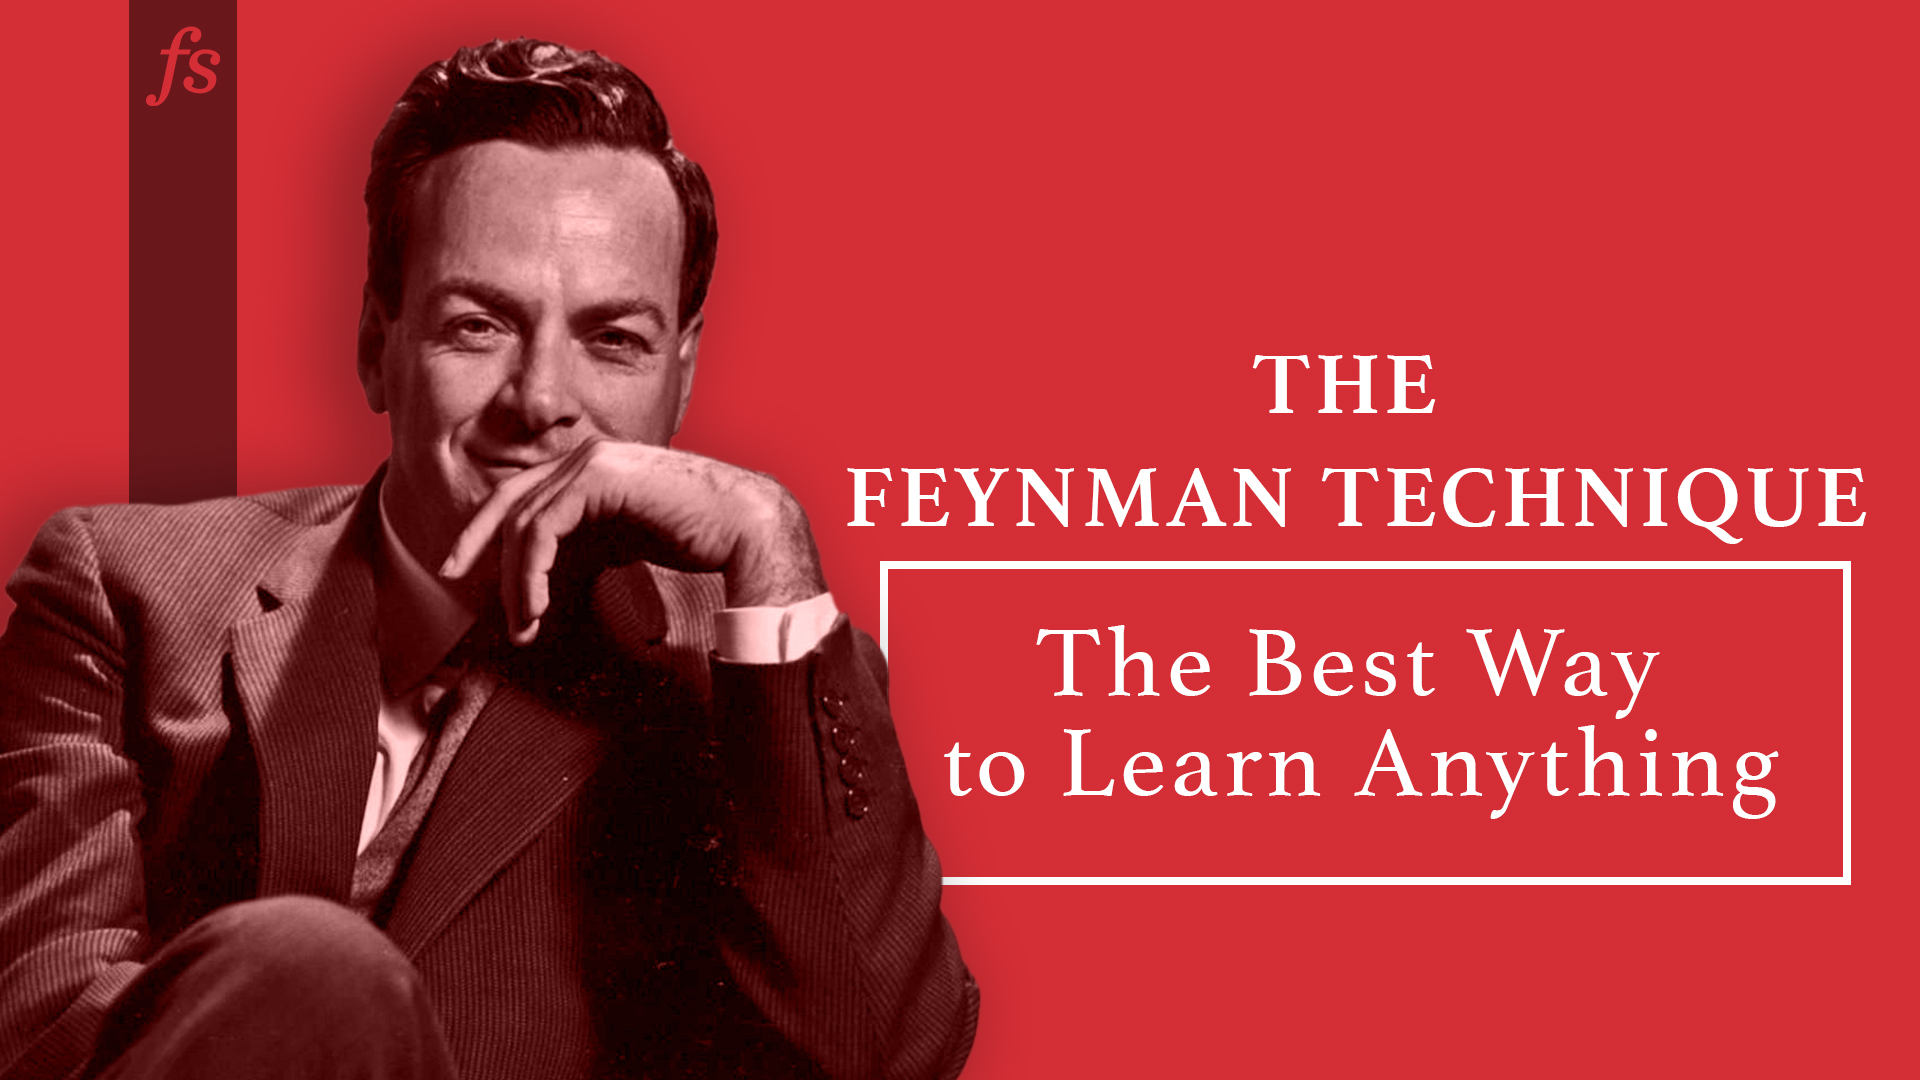 The Feynman Technique: The Best Way to Learn Anything - Farnam Street